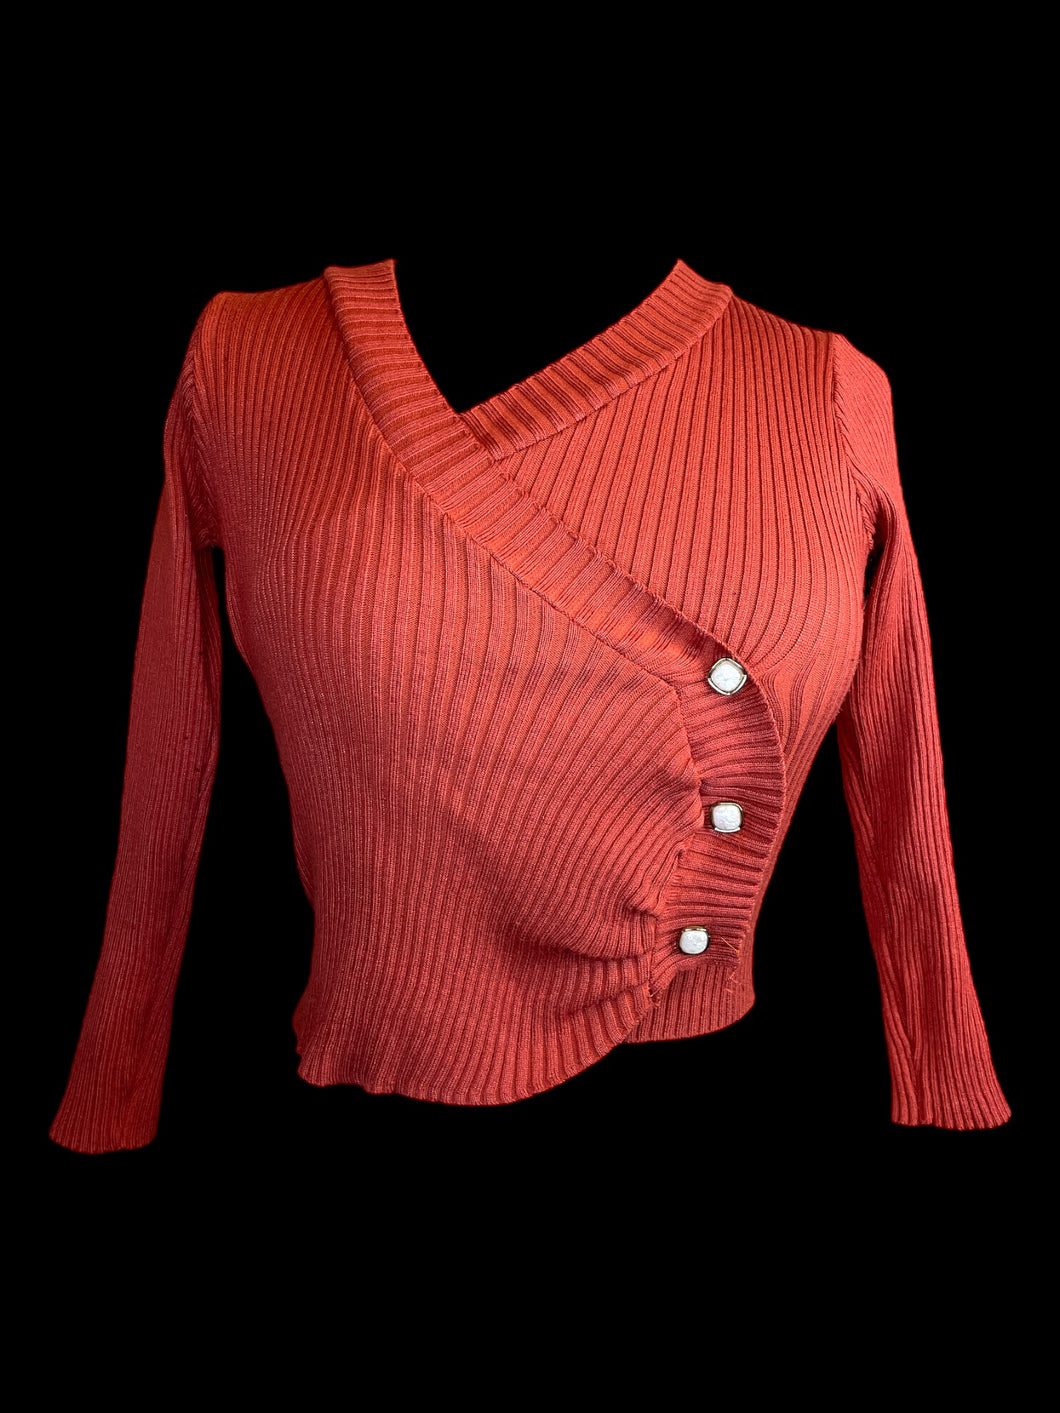 XS Burnt orange long sleeve v-neckline rib knit sweater w/ faux side button closure, & gold-like opalescent square buttons